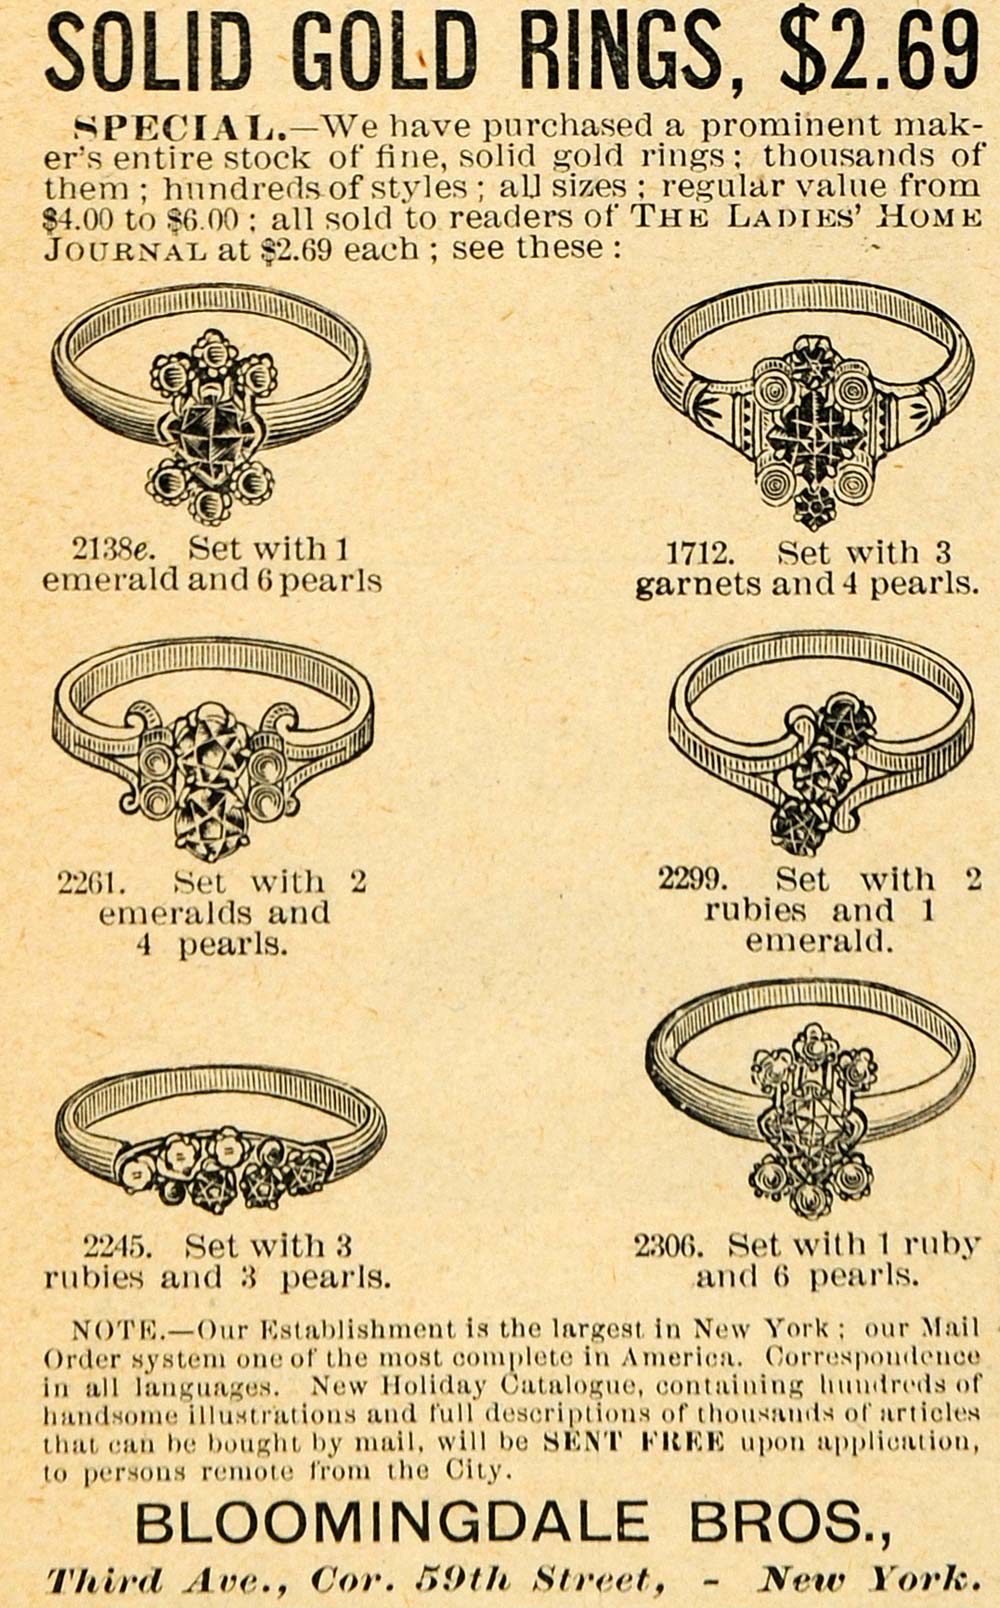 1891 Ad Bloomingdale Bro Gold Ring Models Precious Stones Jewelry Ruby LHJ4